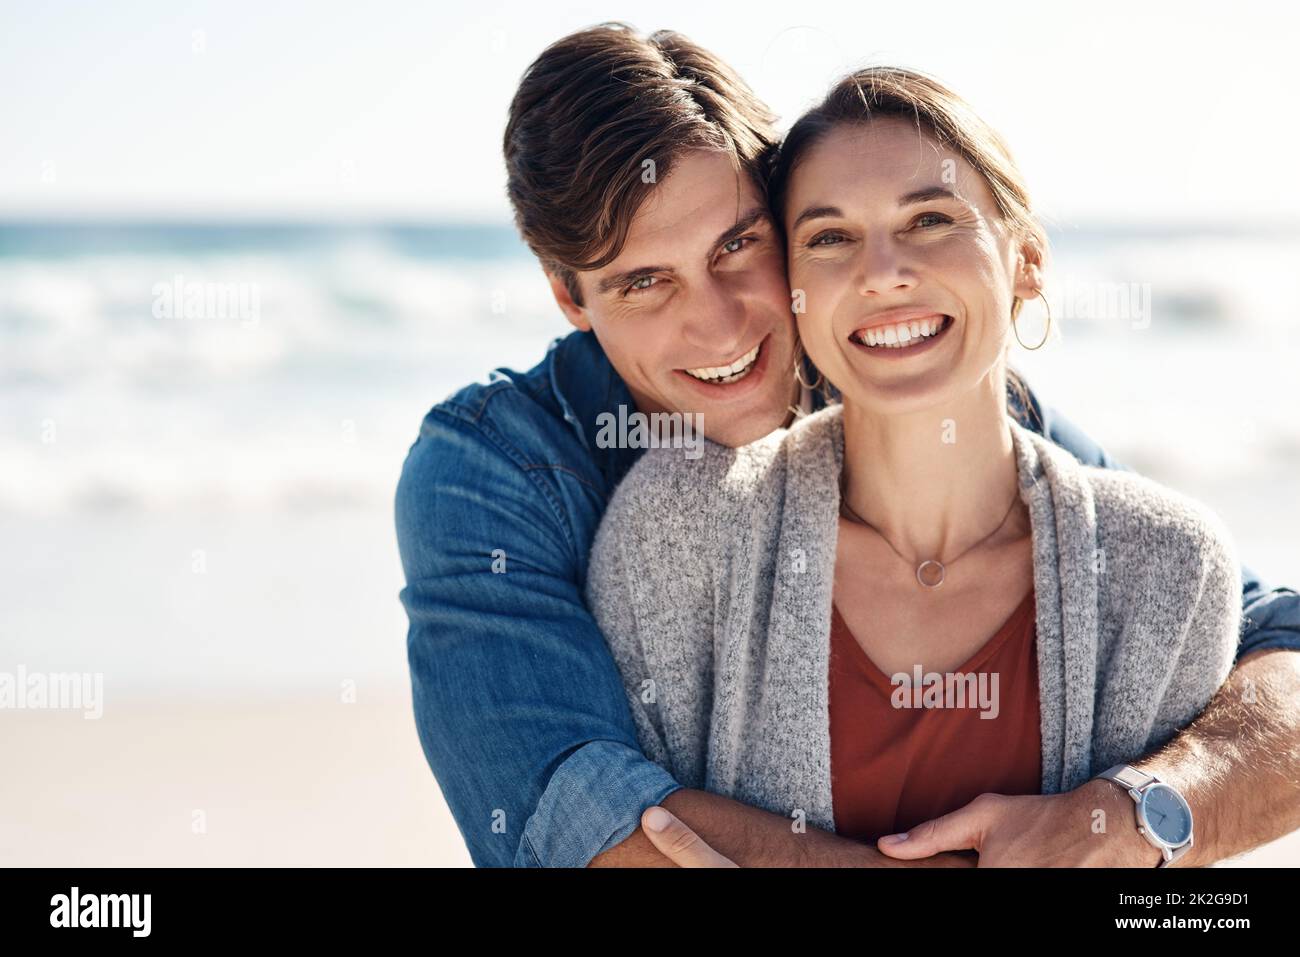 Theres nothing we love more than a beach day. Shot of a middle aged couple spending the day at the beach. Stock Photo